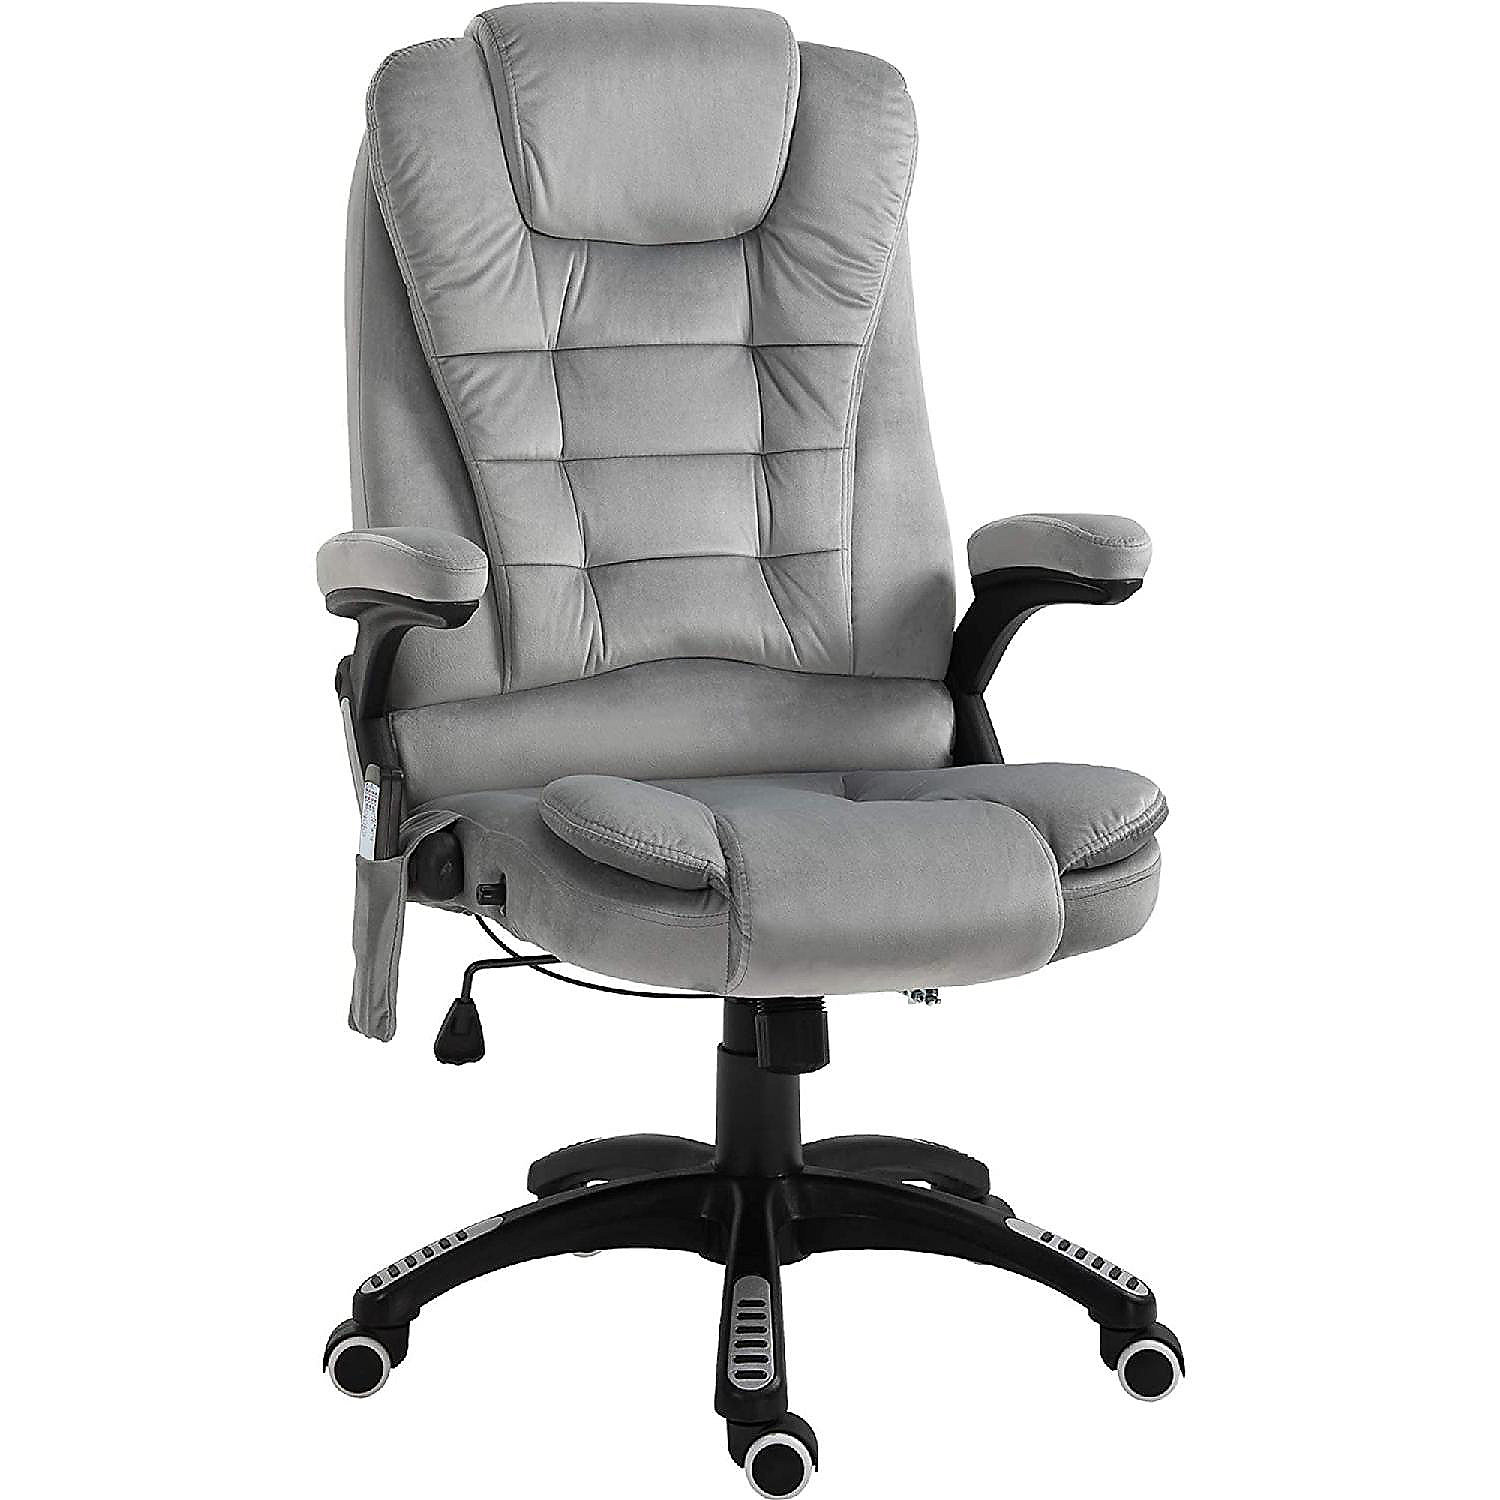 Executive High Back Reclining Office Chair Height Adjustable Massage Office Chair with Footrest Grey Heated Ergonomic Linen Fabric Computer Chair with Lumbar Support 